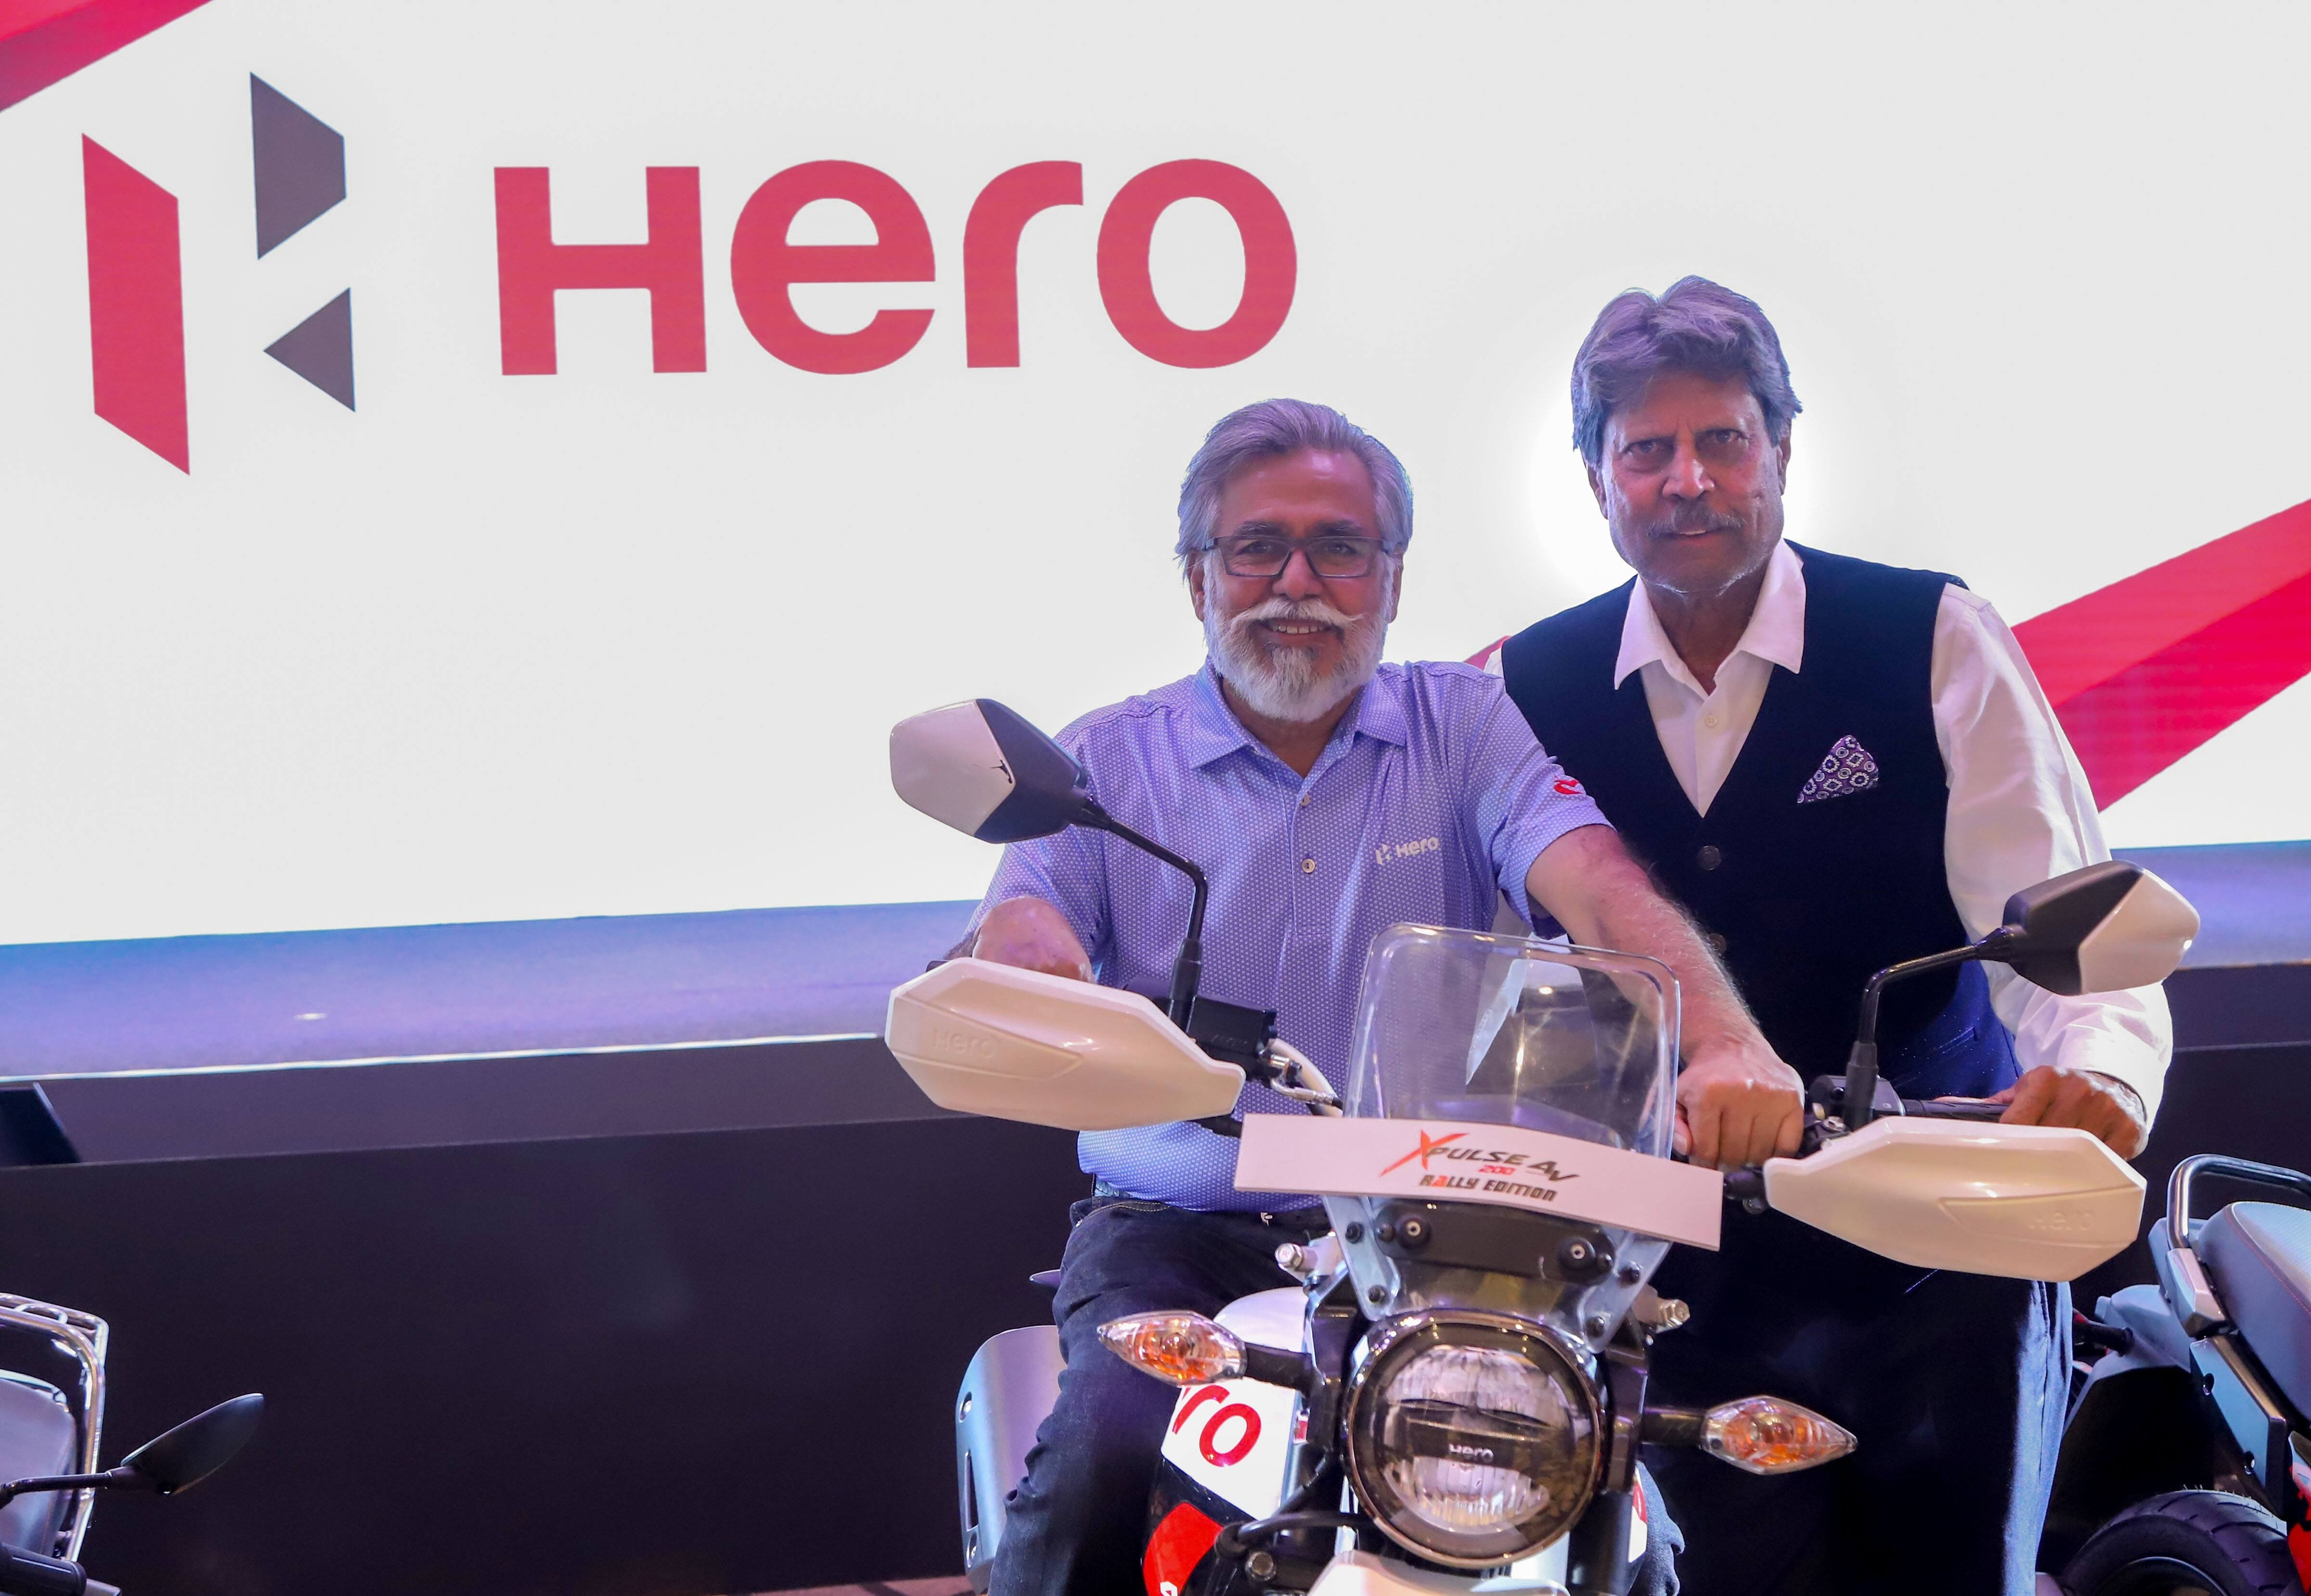 Hero Motocorp: The brokerage has a 'buy' call on the stock with a target at  <span class='webrupee'>₹</span>2,825 per share. It expects the stock to gradually recover its lost market share in motorcycles over the next 2-3 years, led by a gradual picking up of the economy, which would drive consumption from the mid-to-low income consumers and expectation of a revival in the rural economy. In the premium segment, the firm targets to double its market share to 10 percent in the coming years on the back of at least one launch a year over the next 3-4 years, added the brokerage. Market share revival in domestic motorcycles and ramp-up in exports are likely to be key upside triggers for the stock, said HDFC Sec. (PTI Photo) (PTI04_26_2022_000039B)